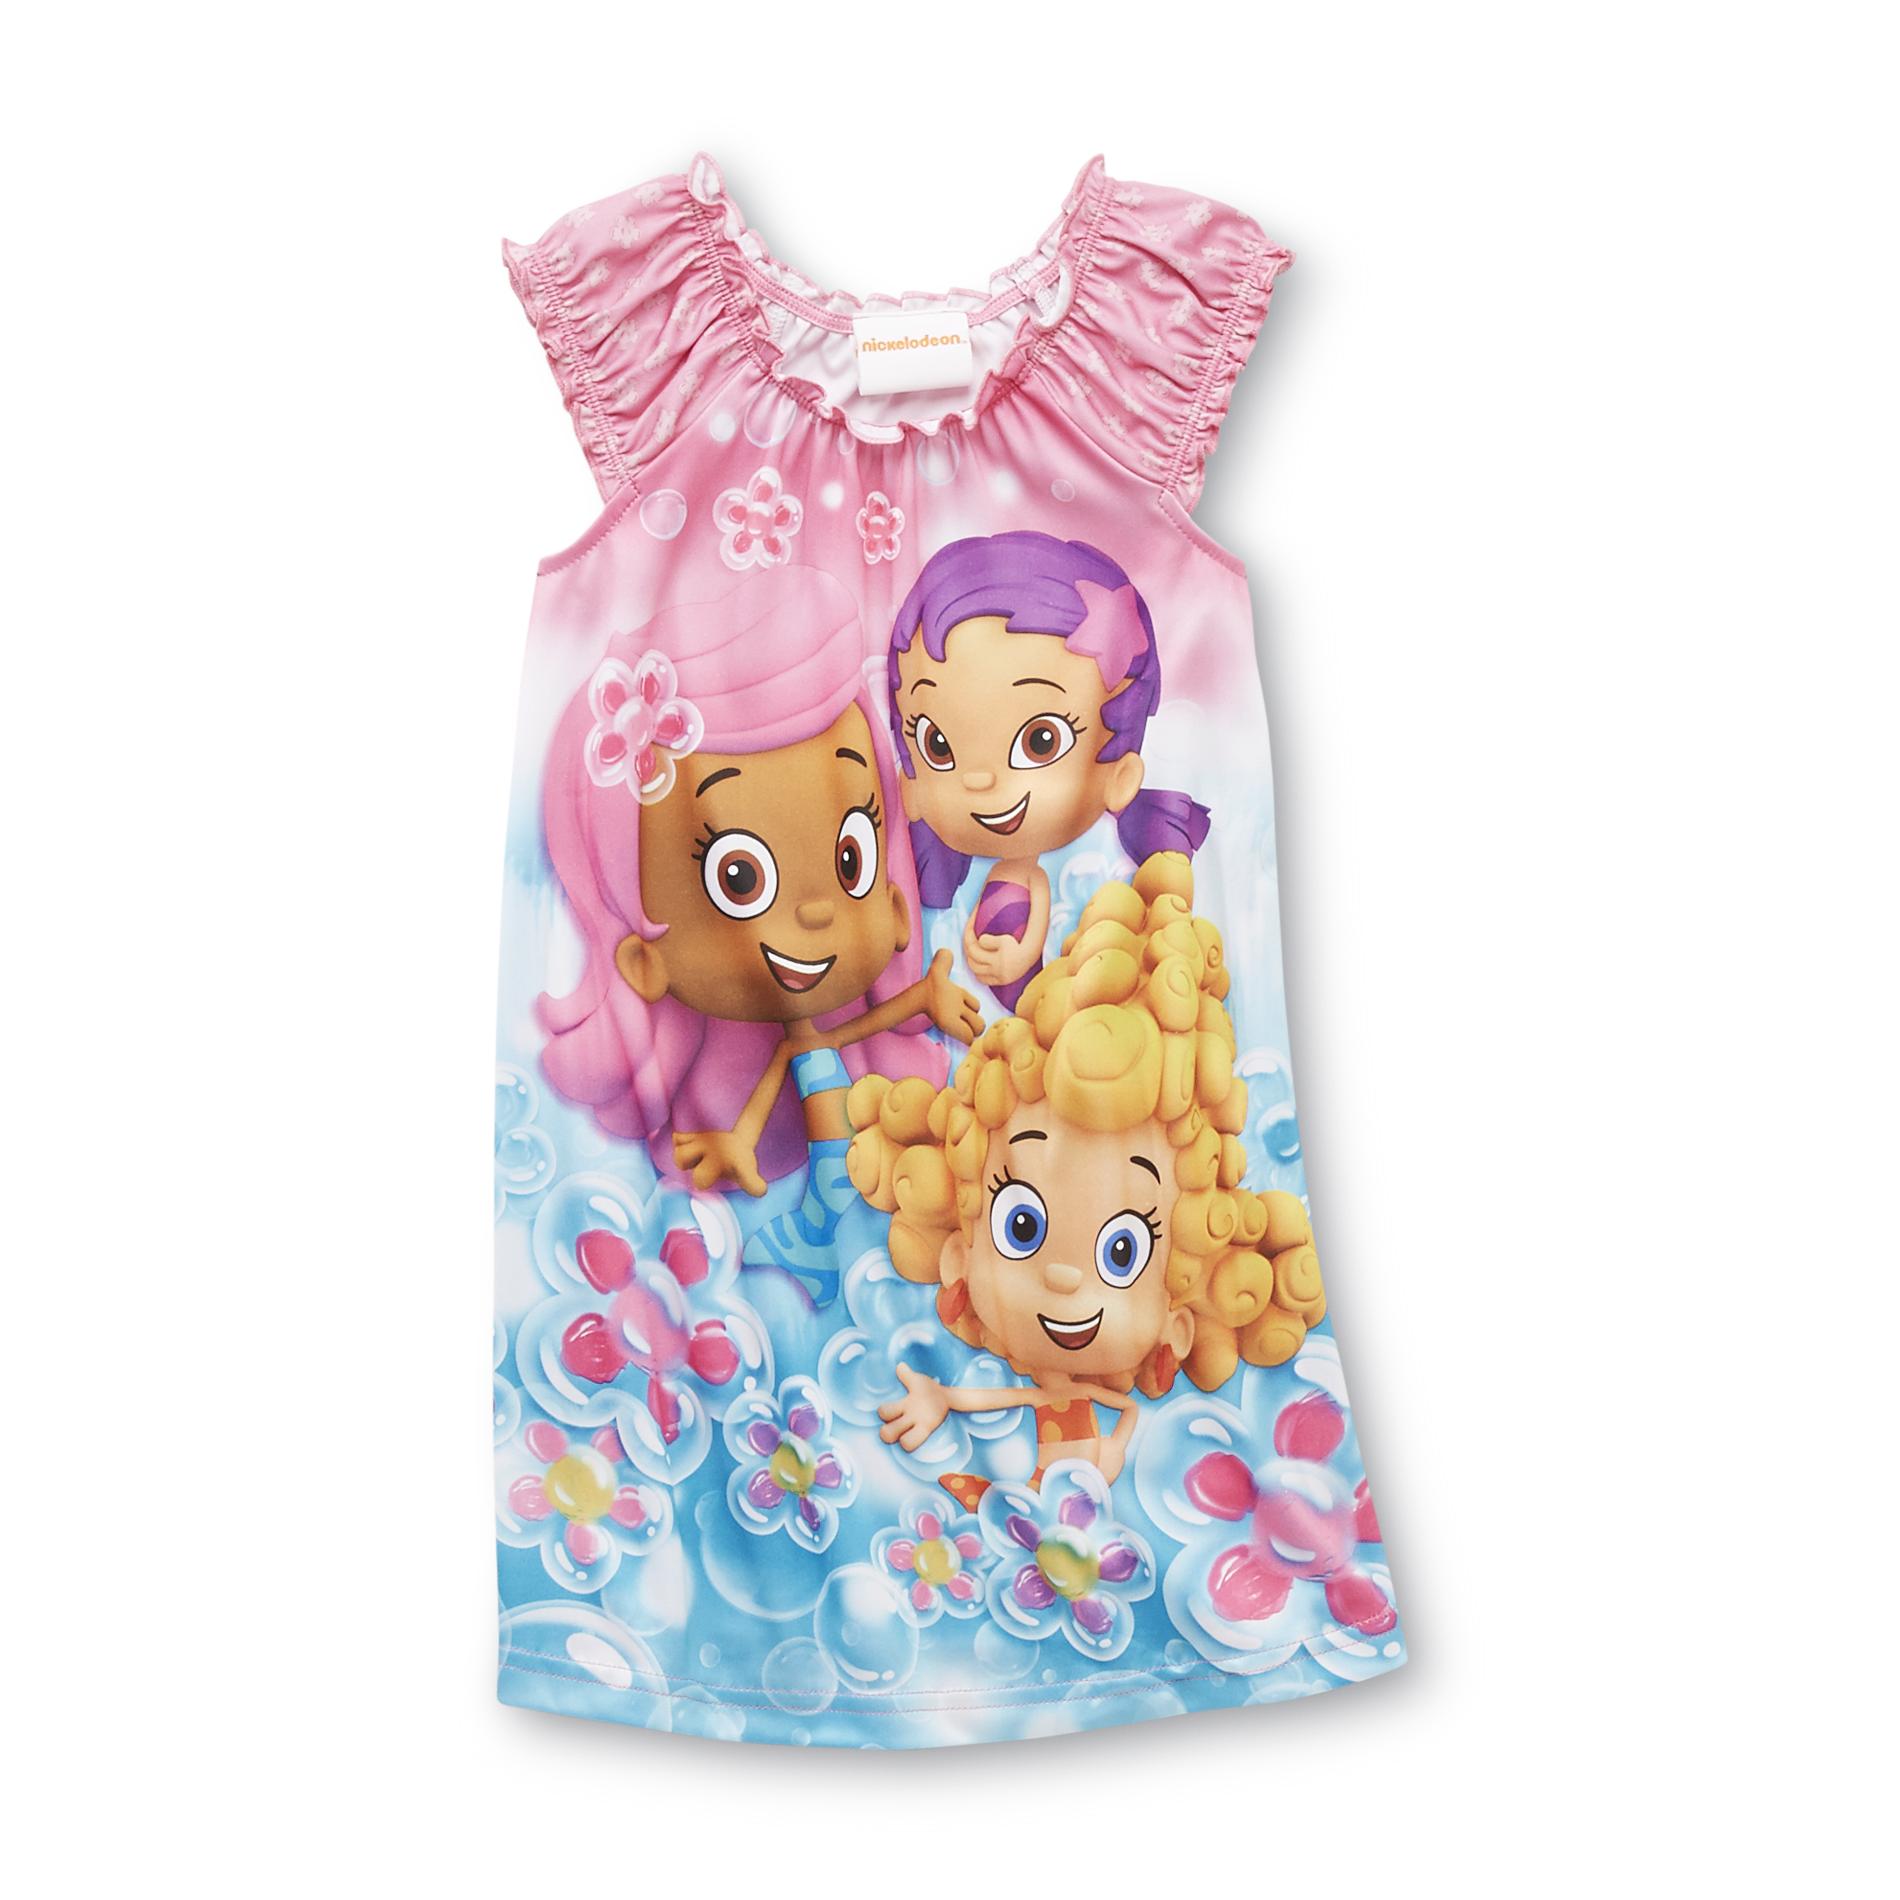 Nickelodeon Infant & Toddler Girl's Nightgown - Bubble Guppies